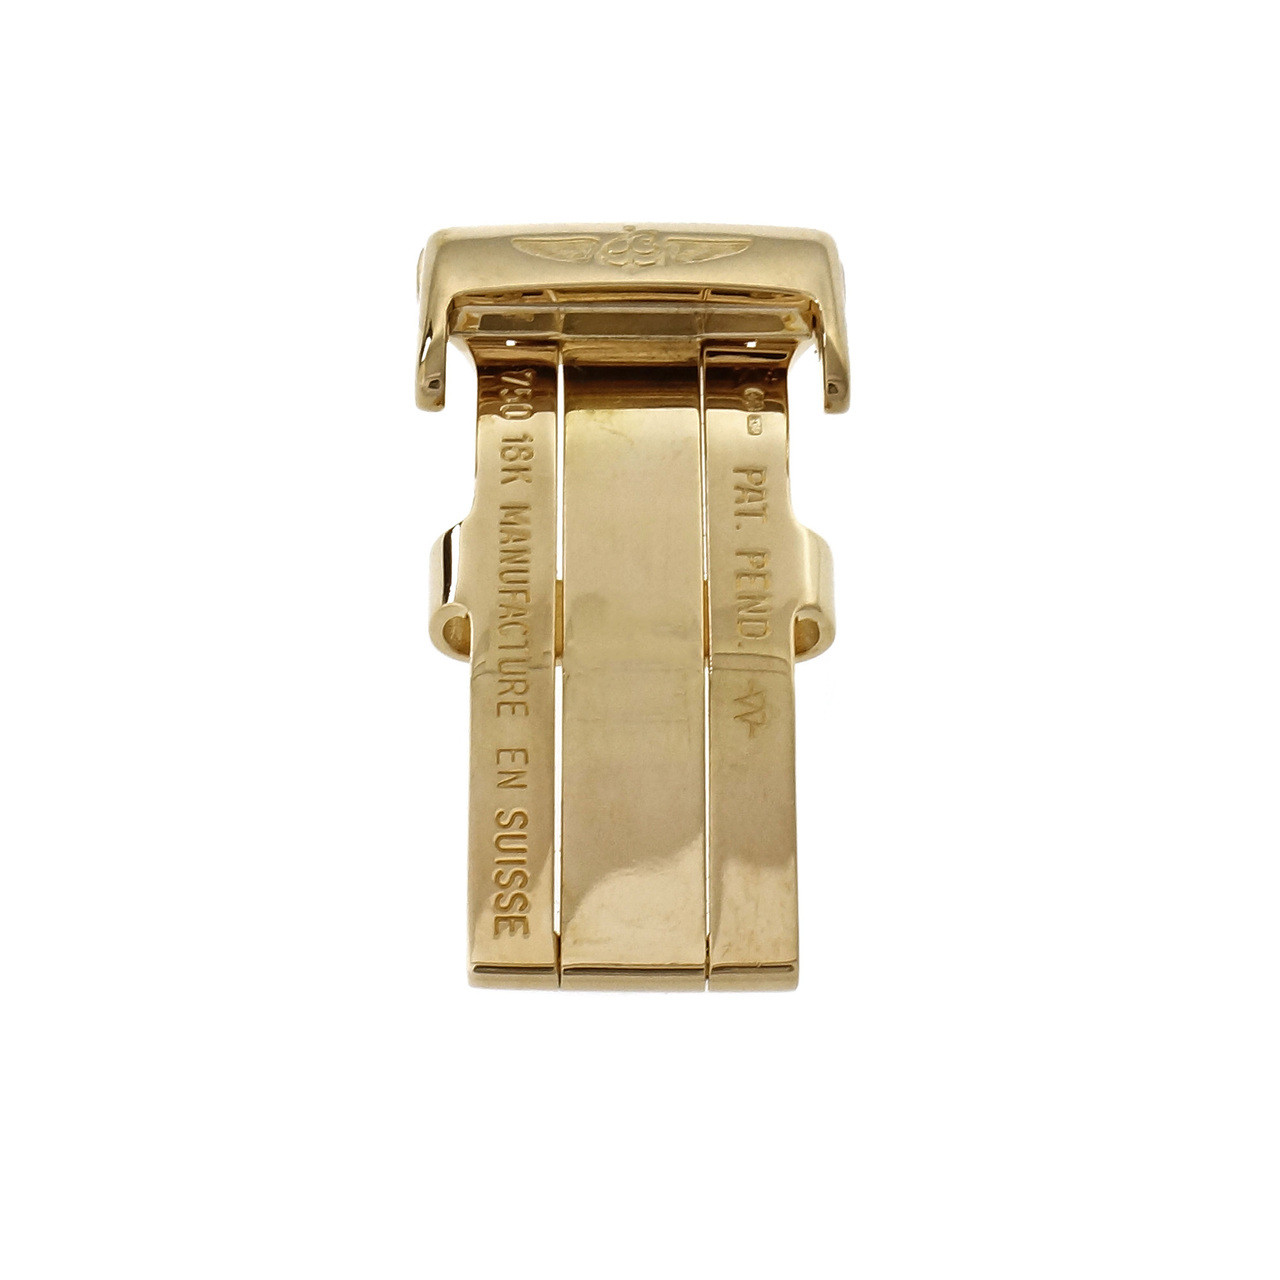 Rolex Deployant Buckle yellow gold 18kt 14mm for $2,721 for sale